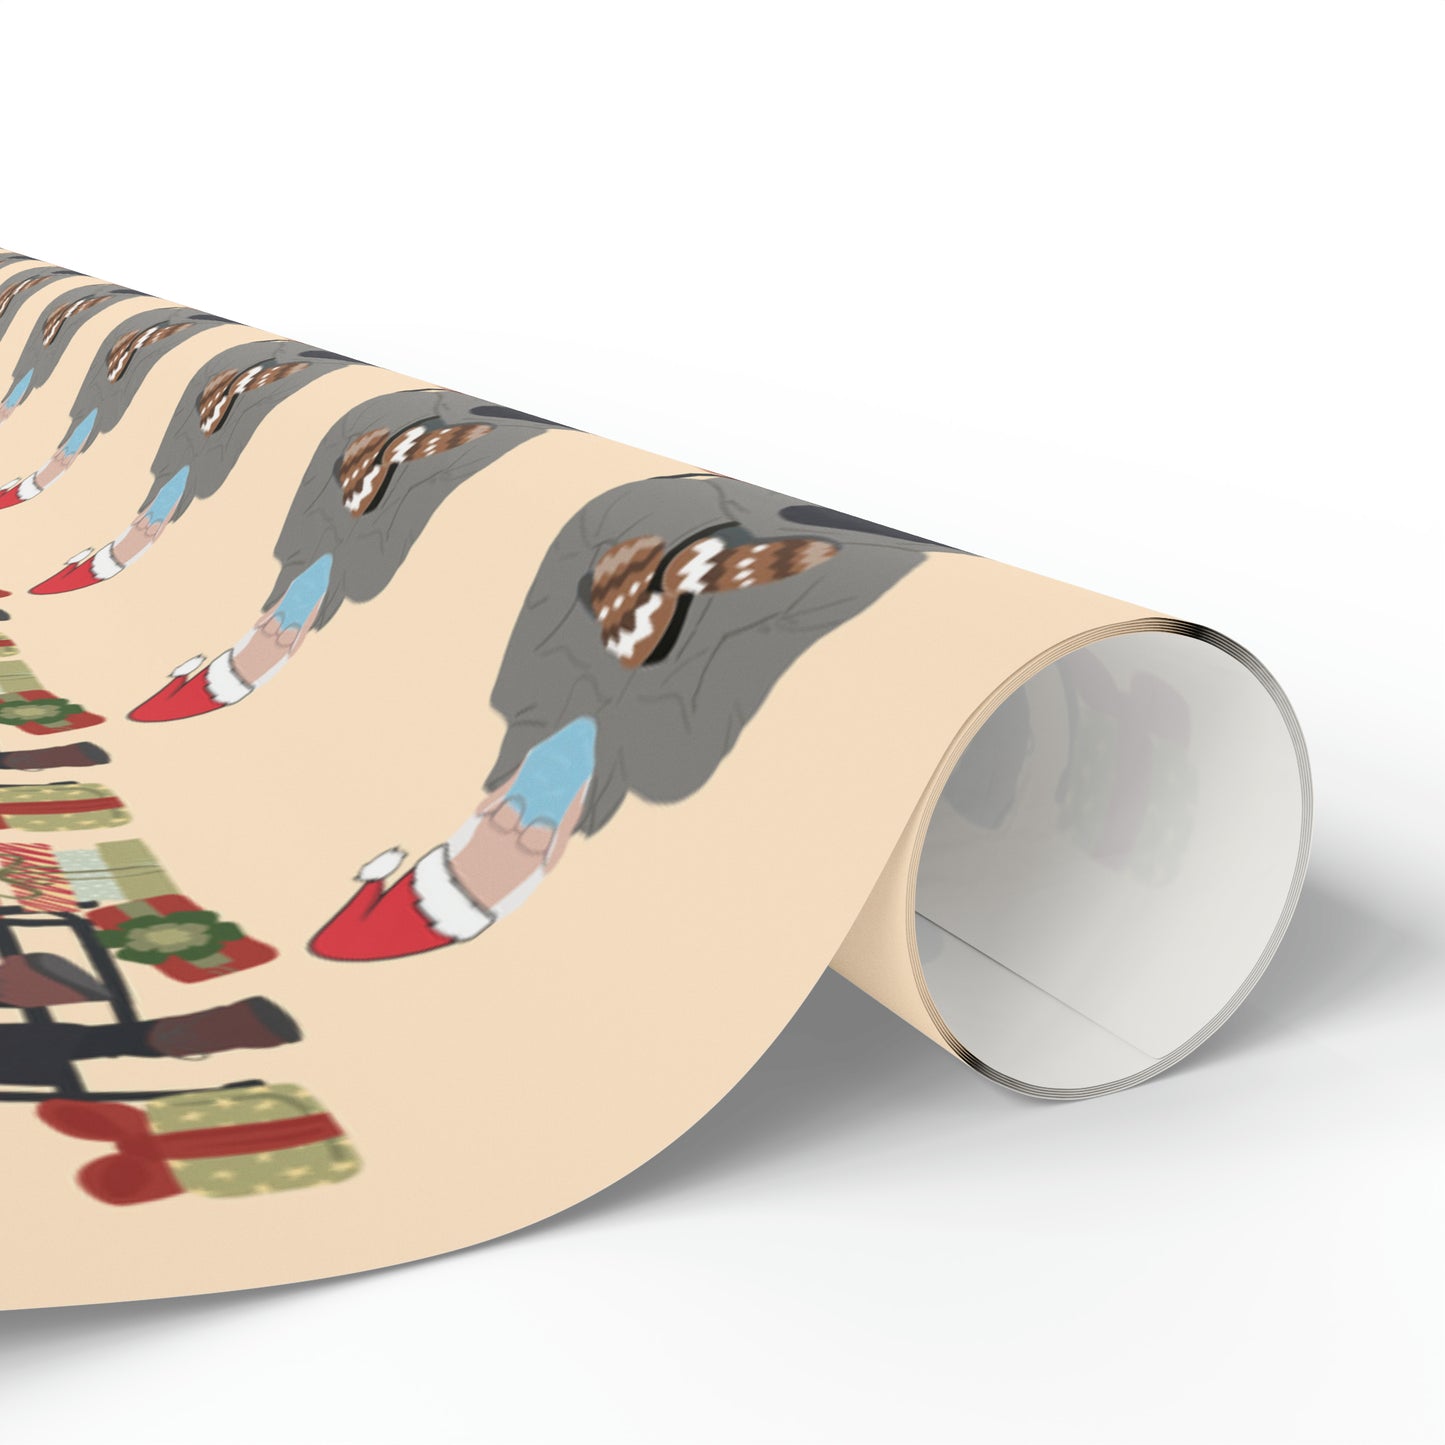 Bernie Sanders Mittens Meme Christmas Gift Wrap - Funny Bernie Wrapping Paper for Christmas